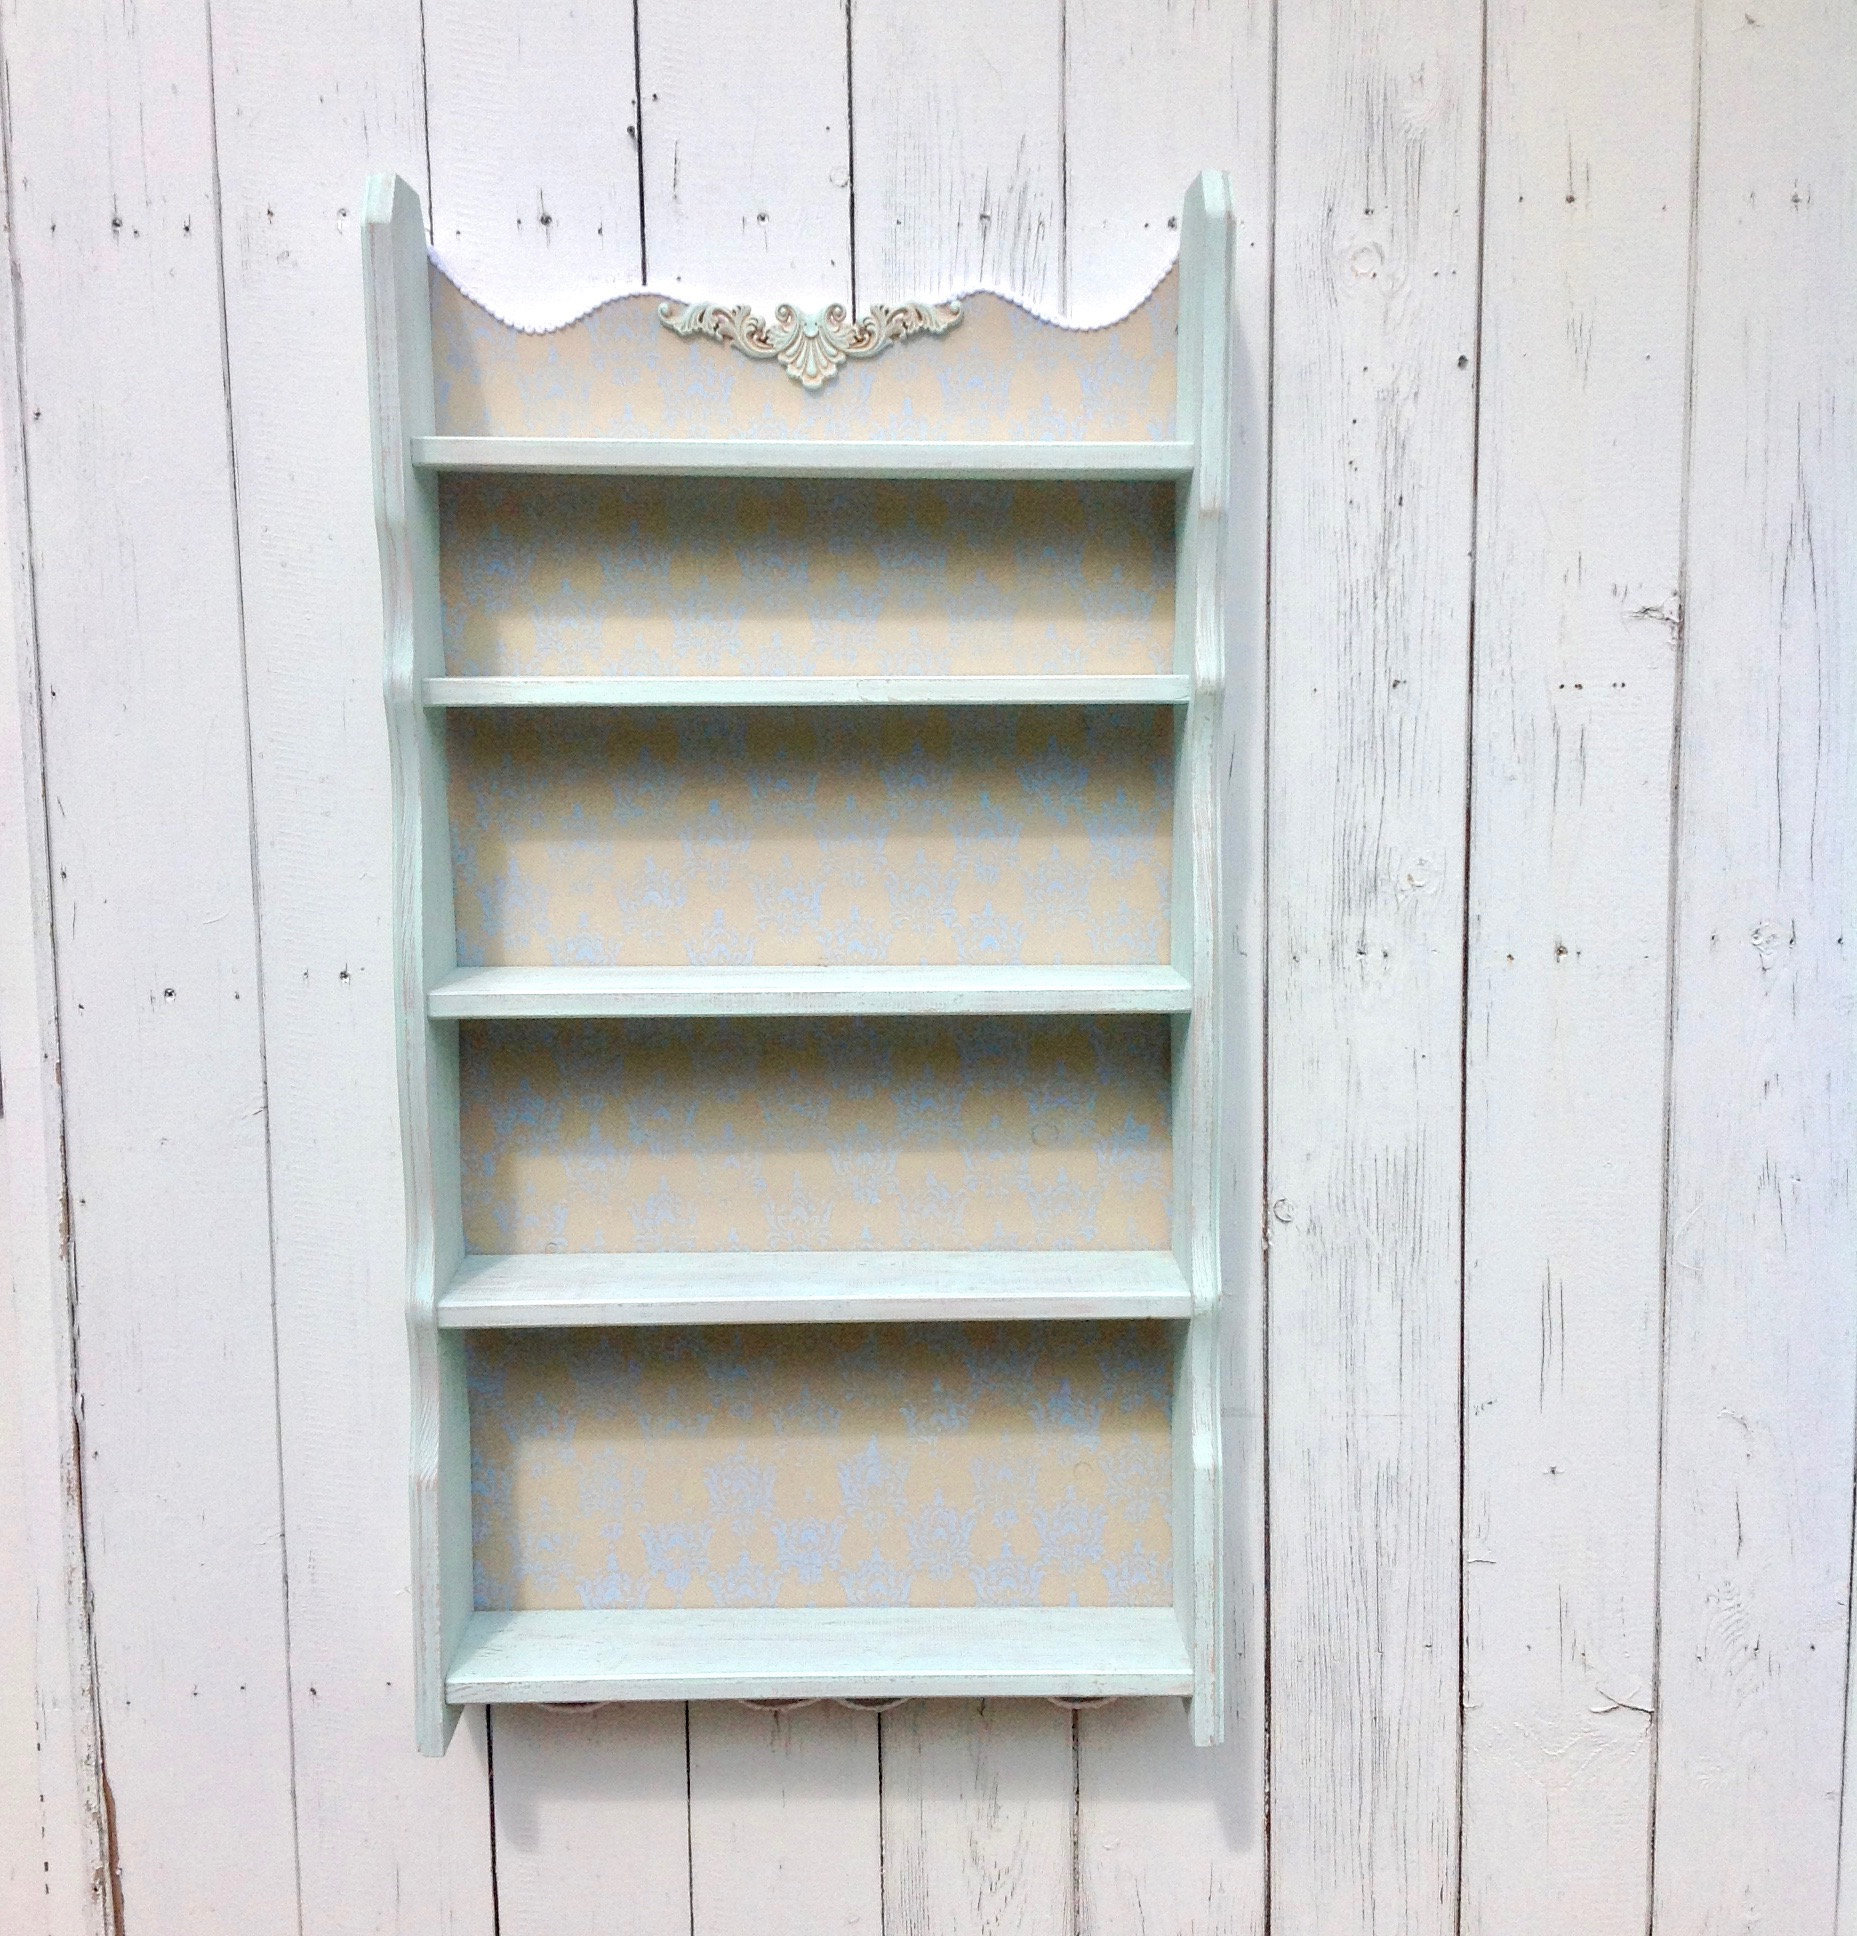 H4L Wall Shelf with 6 Drawers Antique White Vintage Kitchen Shelf Wooden Shelf 80 cm Country House Style 